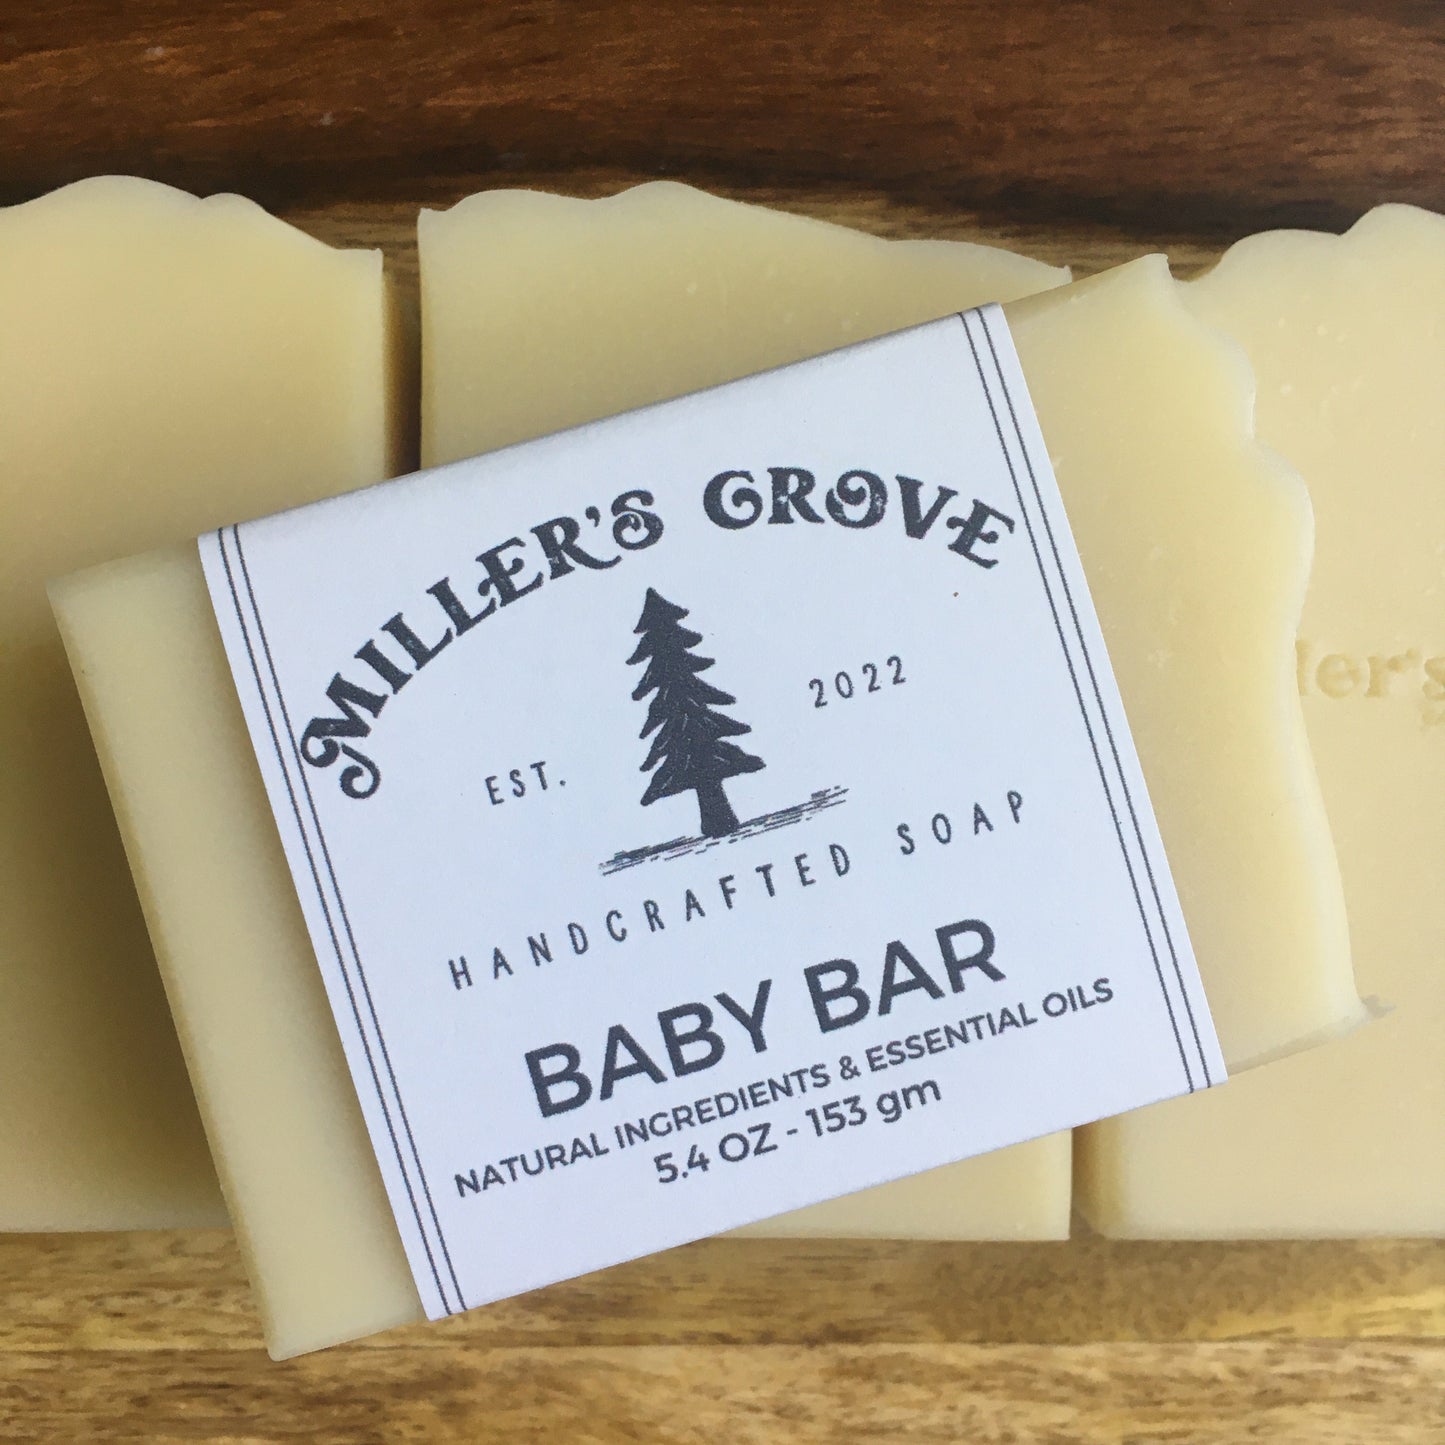 White bar of soap called "Baby Bar"